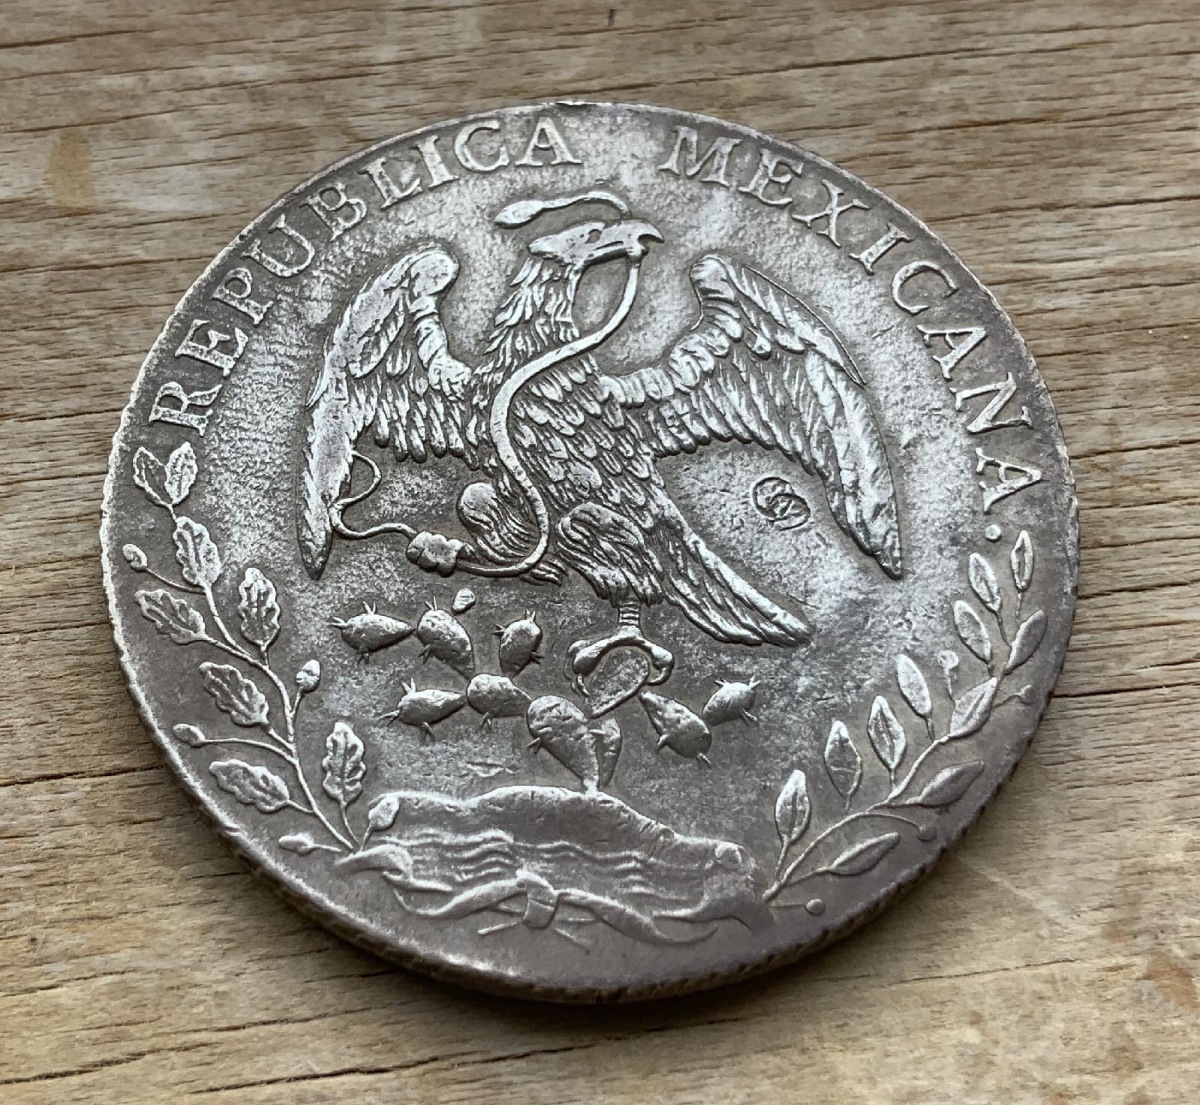 1890 Mexico 8 Reales .903 silver coin C331